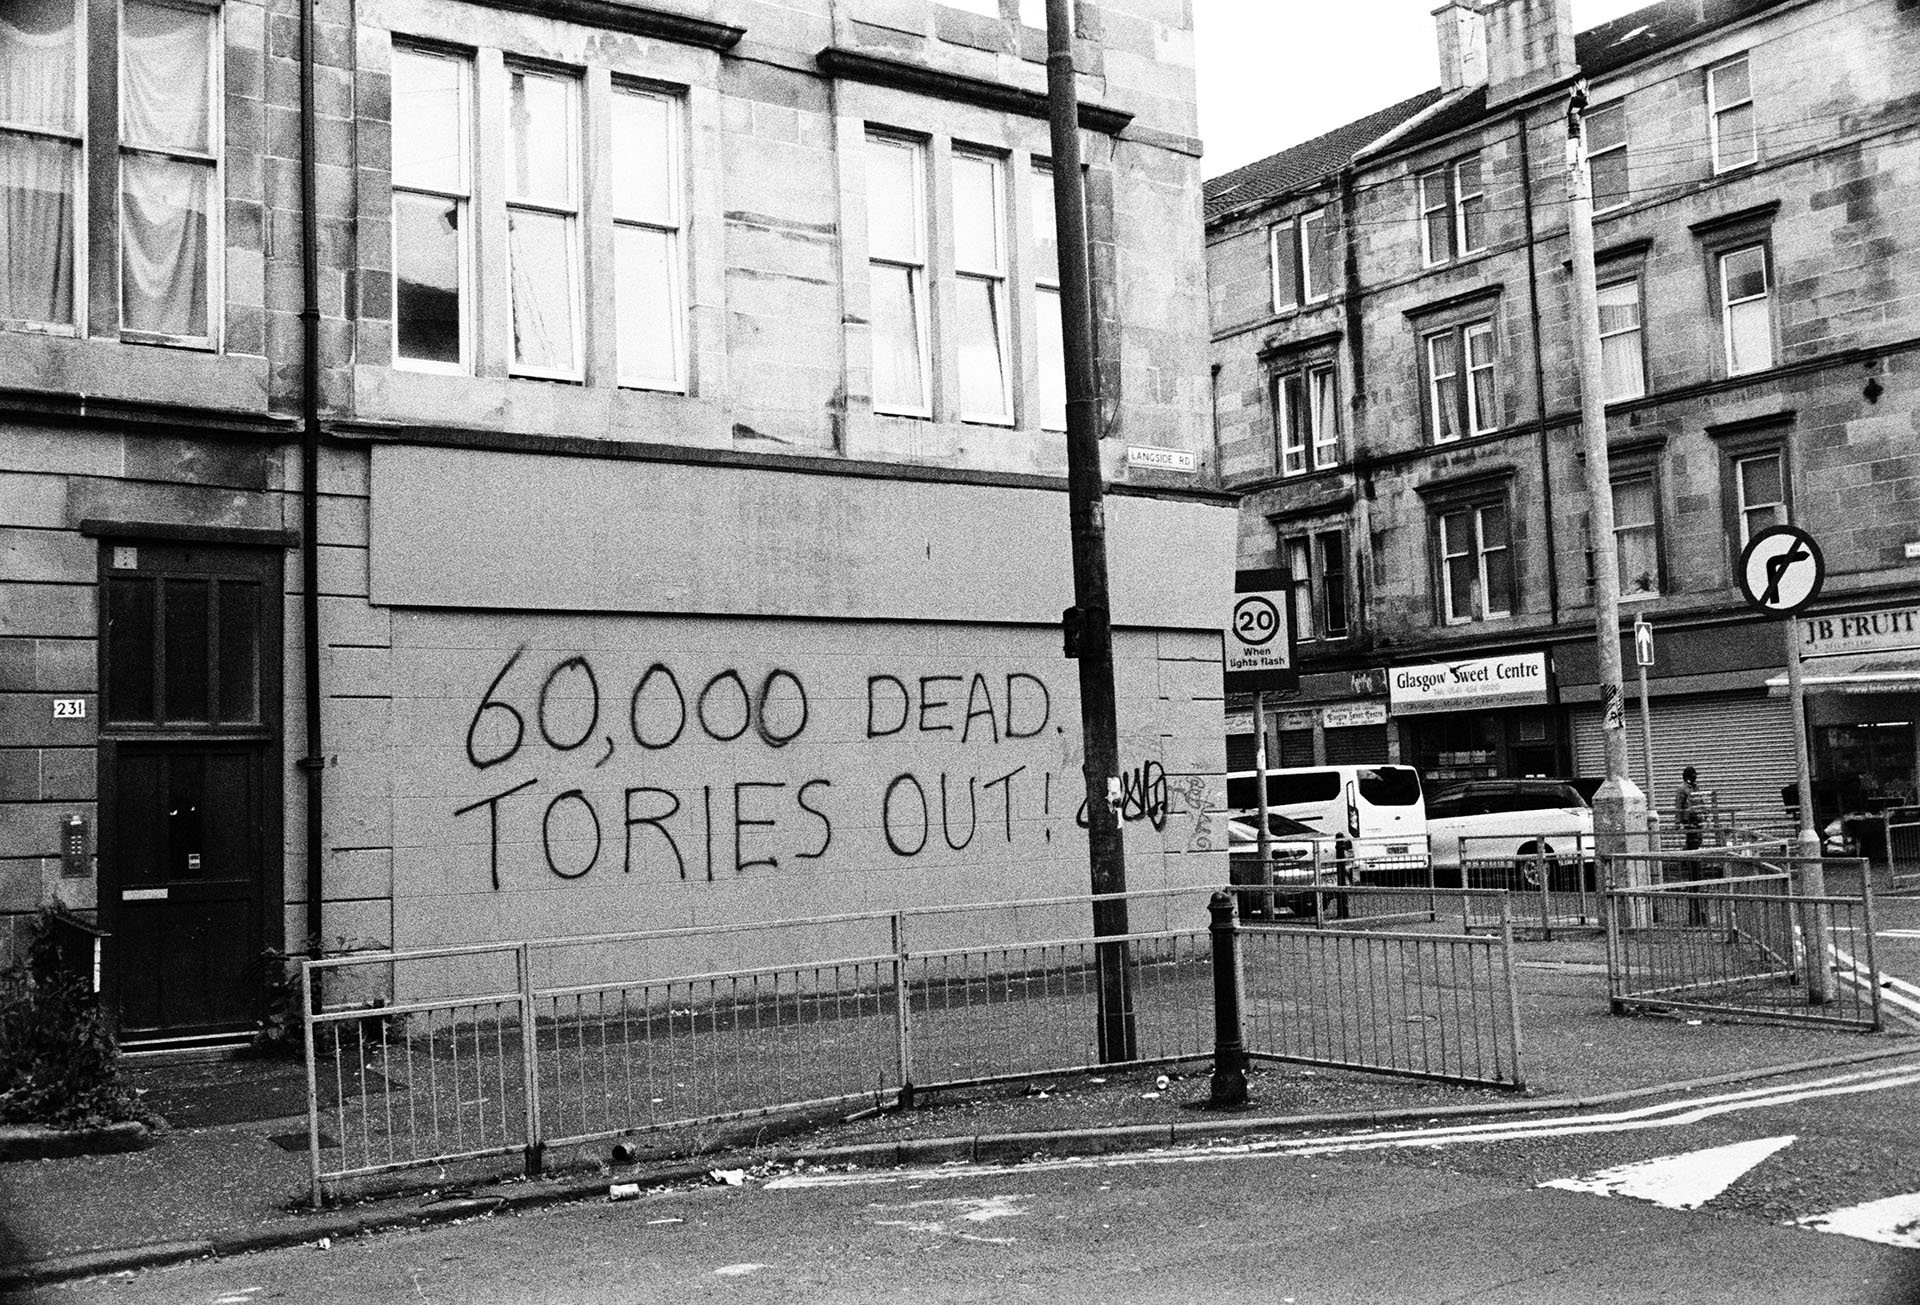 Glasgow Tories Out